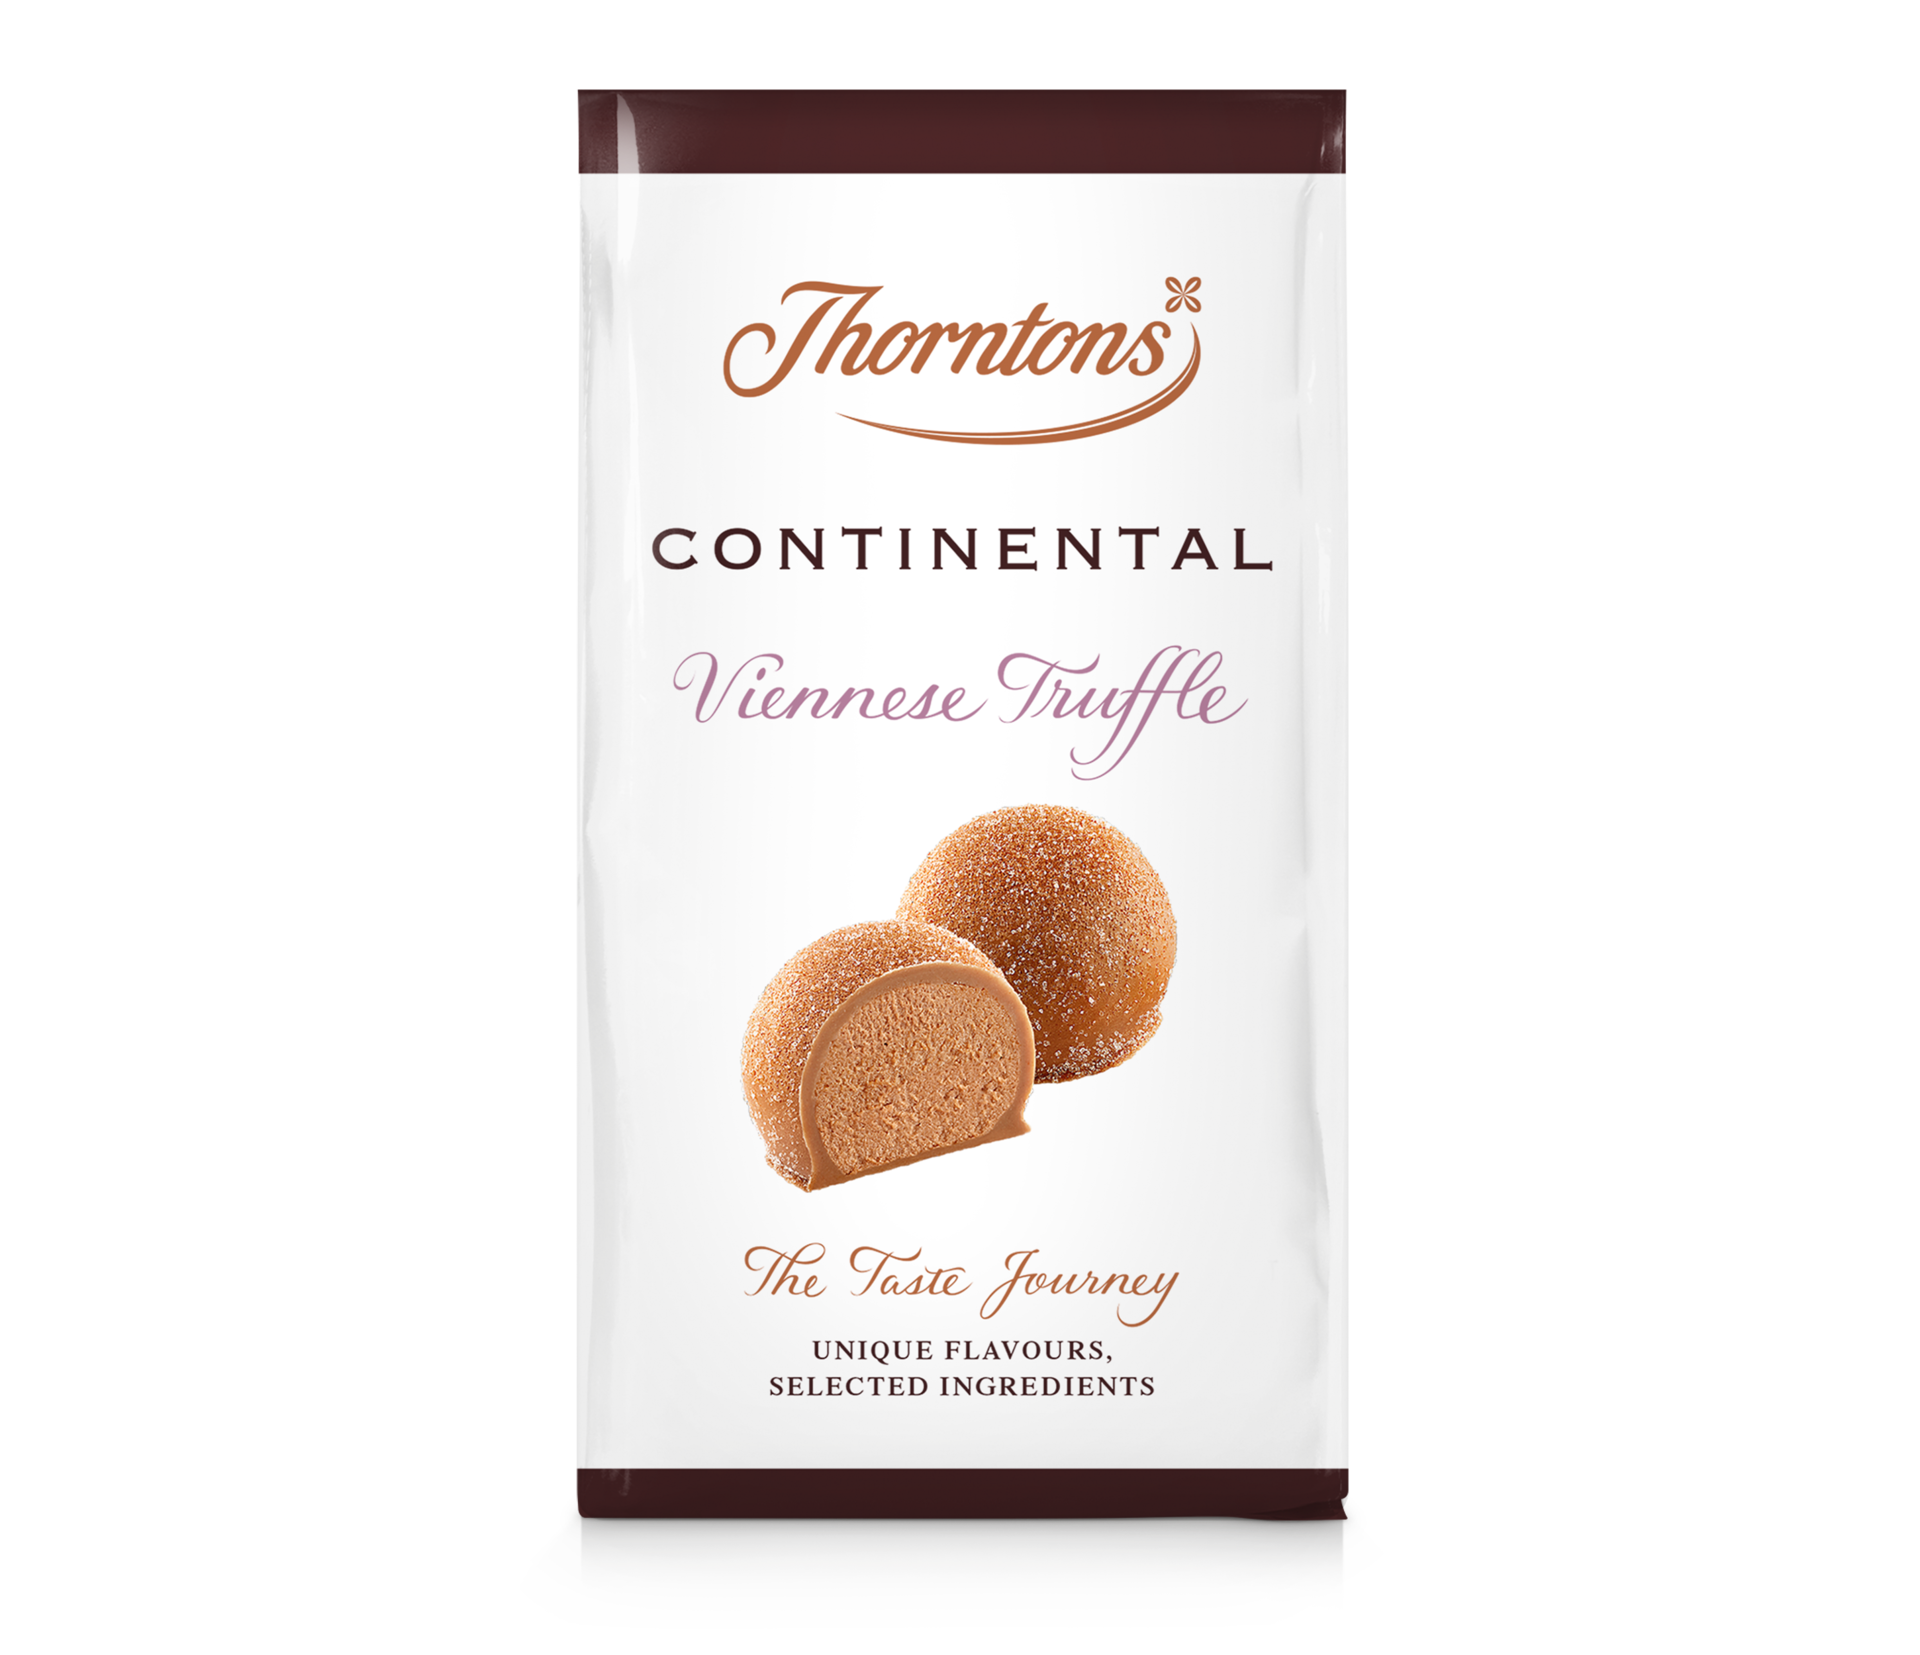 https://www.thorntons.com/medias/sys_master/images/hc8/hd0/8916763639838/77177422_main/77177422-main.png?resize=ProductGridComponent